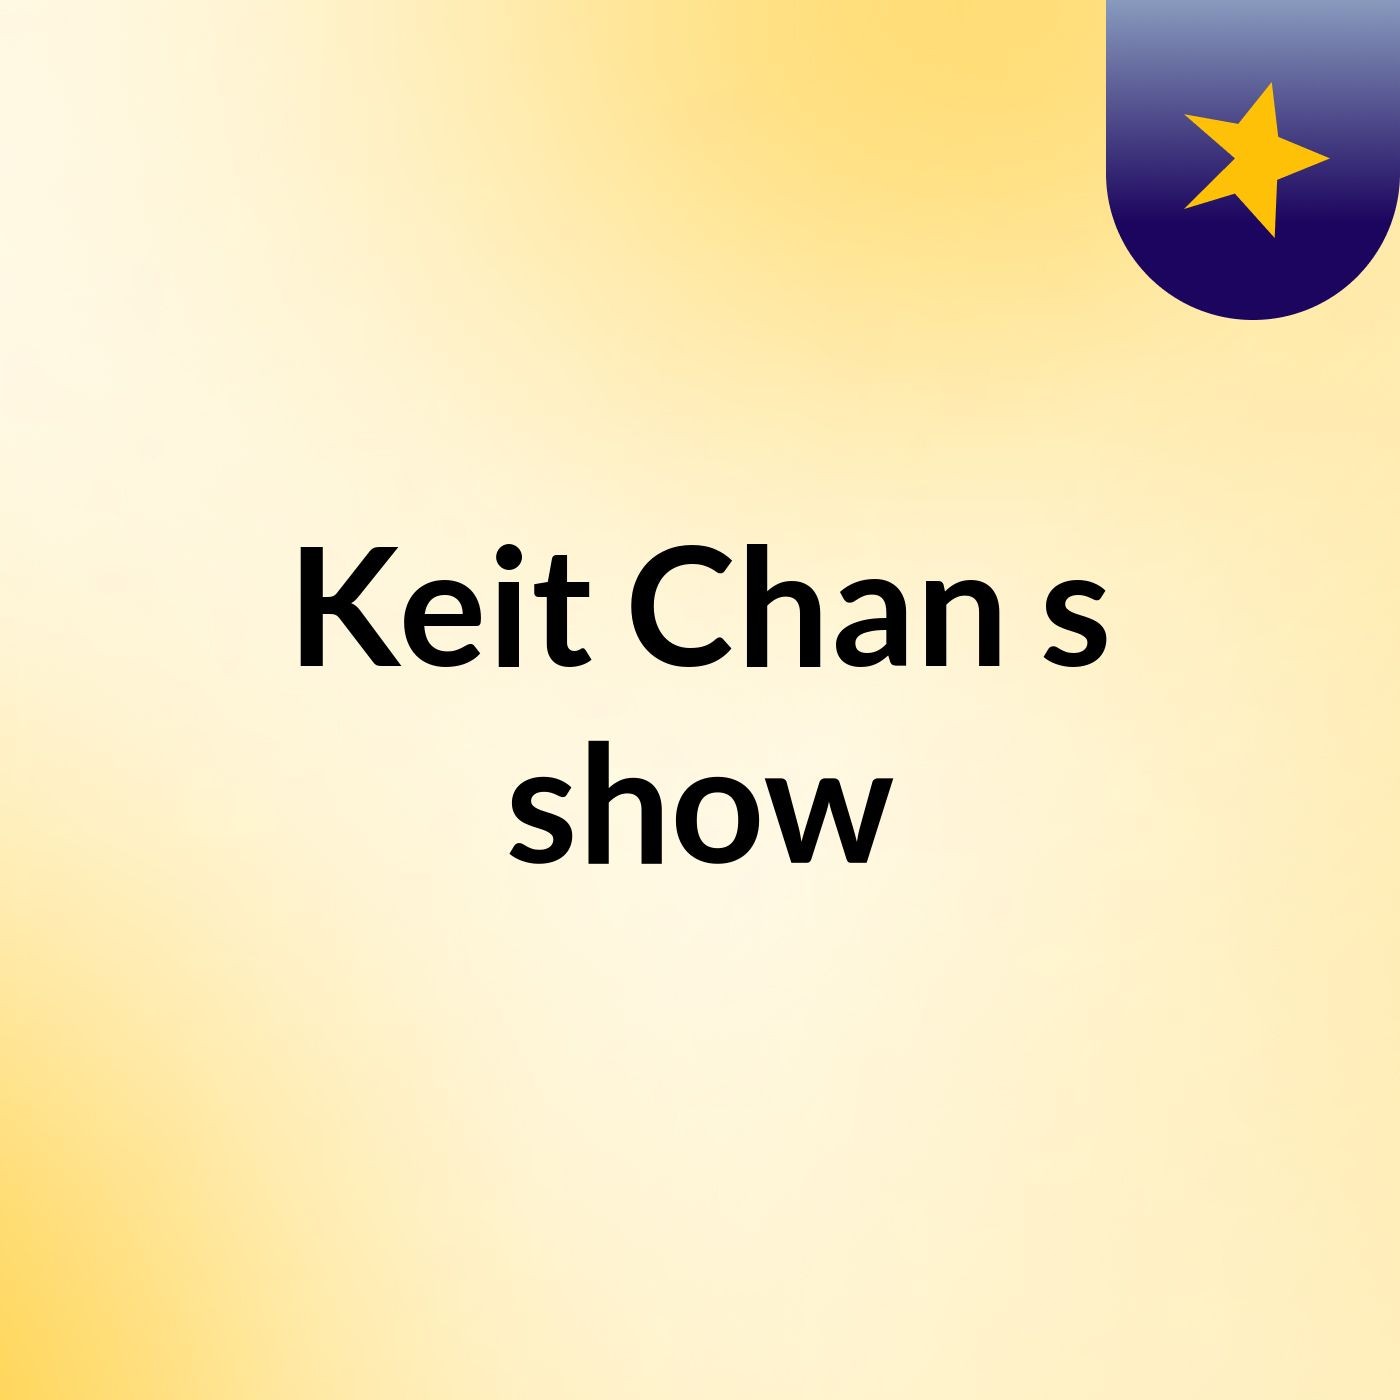 Keit Chan's show